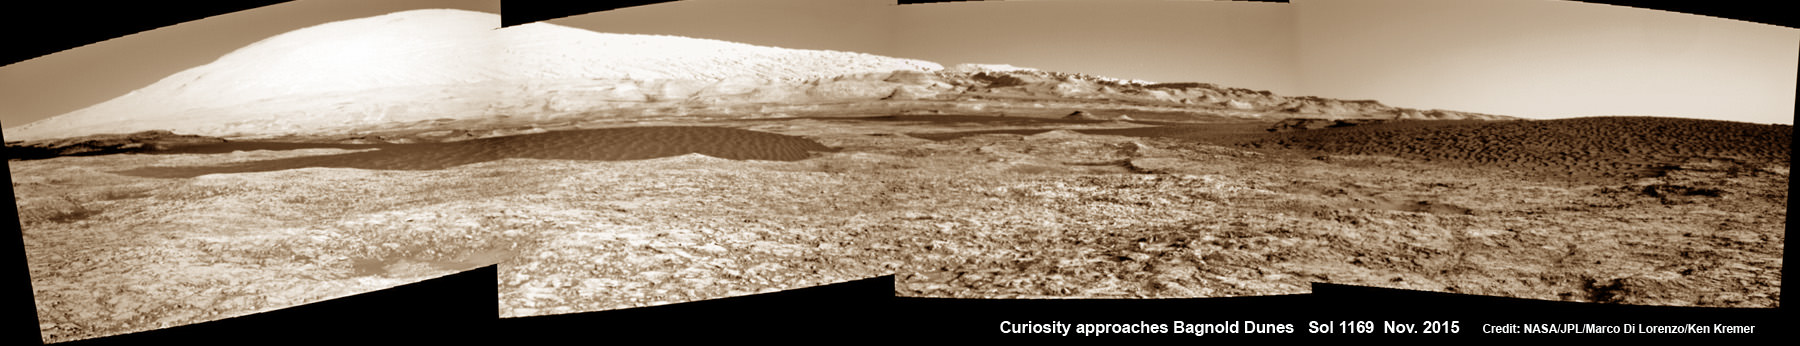 Curiosity approaches the dark Bagnold Dunes backdropped by towering Mount Sharp, for first in-place study of an active sand dune anywhere other than Earth.  This colorized photo mosaic is stitched from navcam camera raw images taken on Sol 1169, Nov. 19, 2015.  Credit: NASA/JPL/ Marco Di Lorenzo/Ken Kremer/kenkremer.com